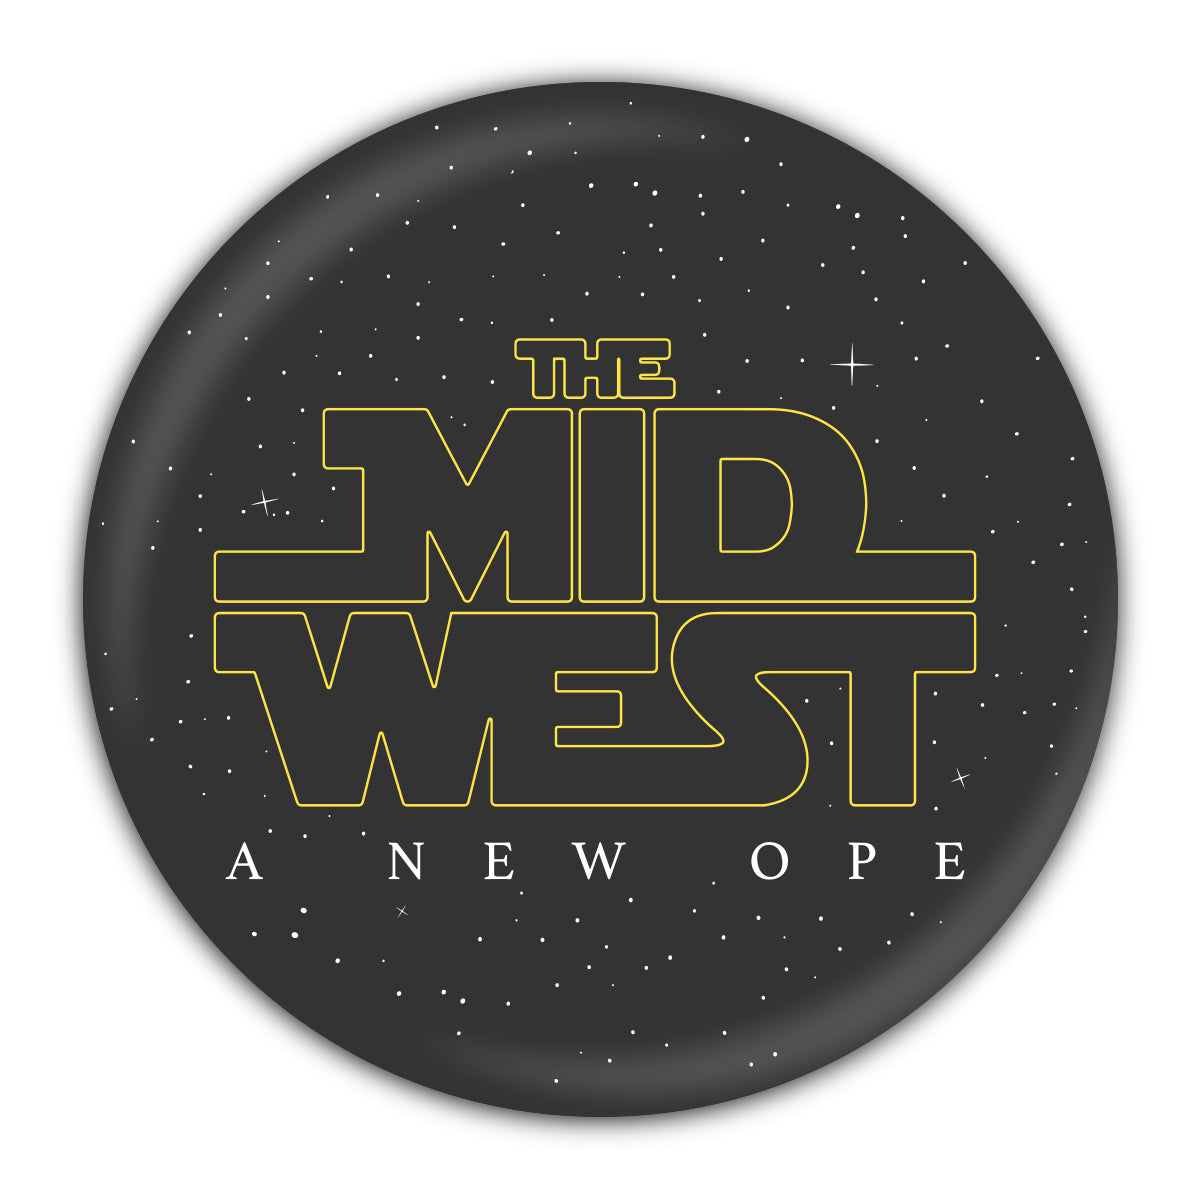 Midwest A New Ope Round Coaster